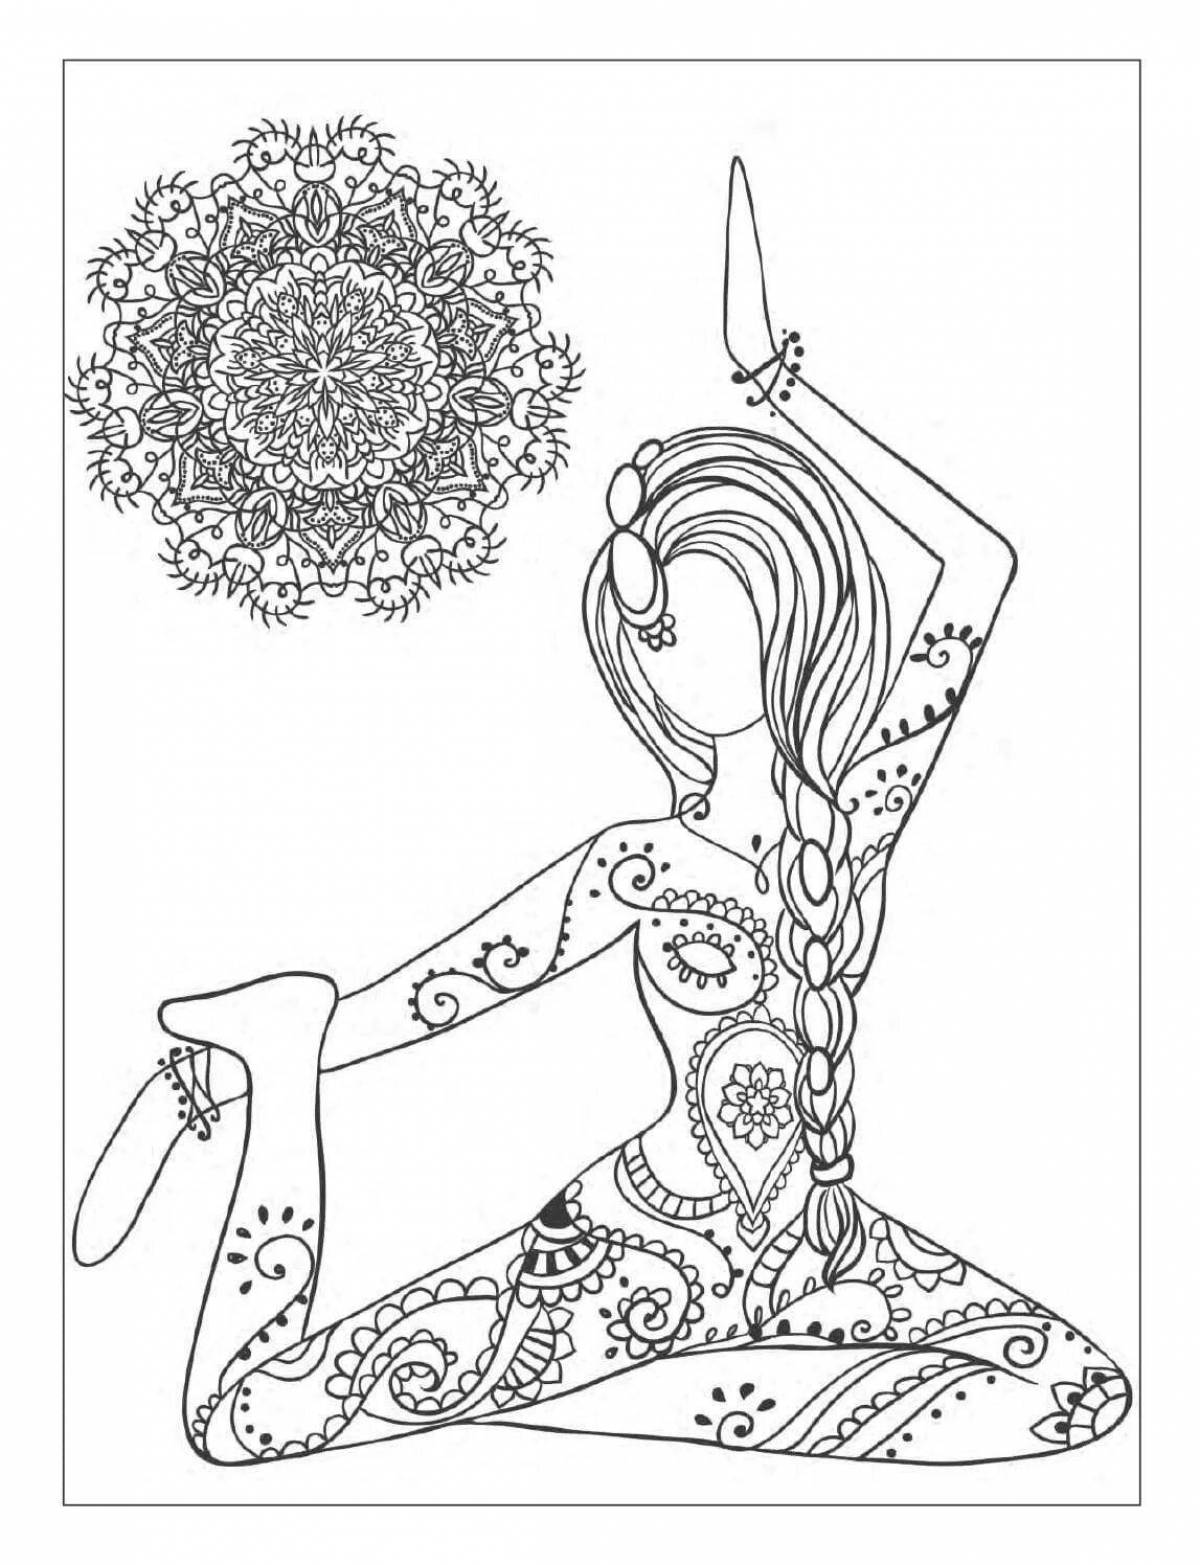 Imaginary coloring book for meditation and relaxation